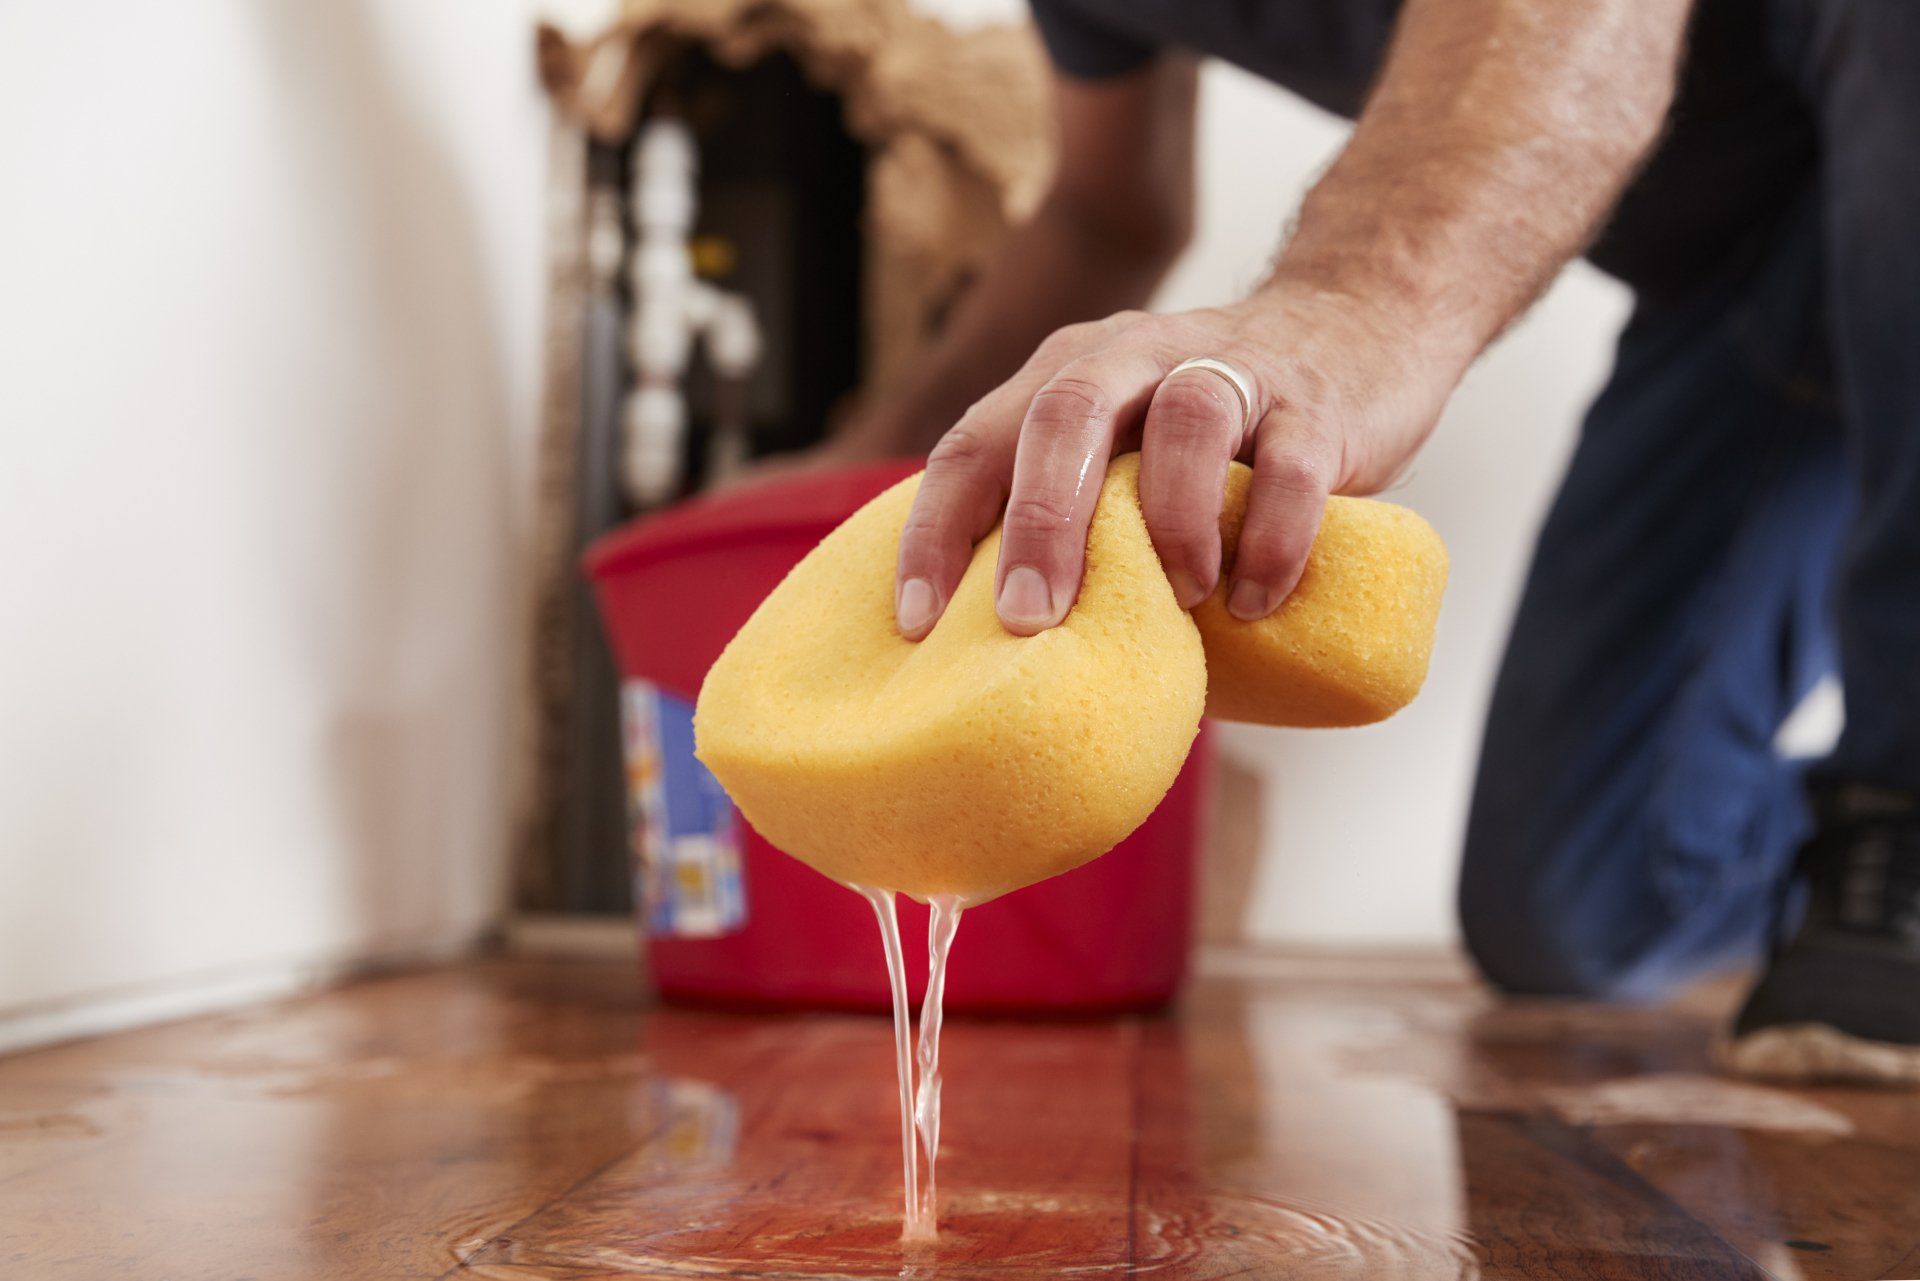 Man removing water from flooded floor with a sponge.